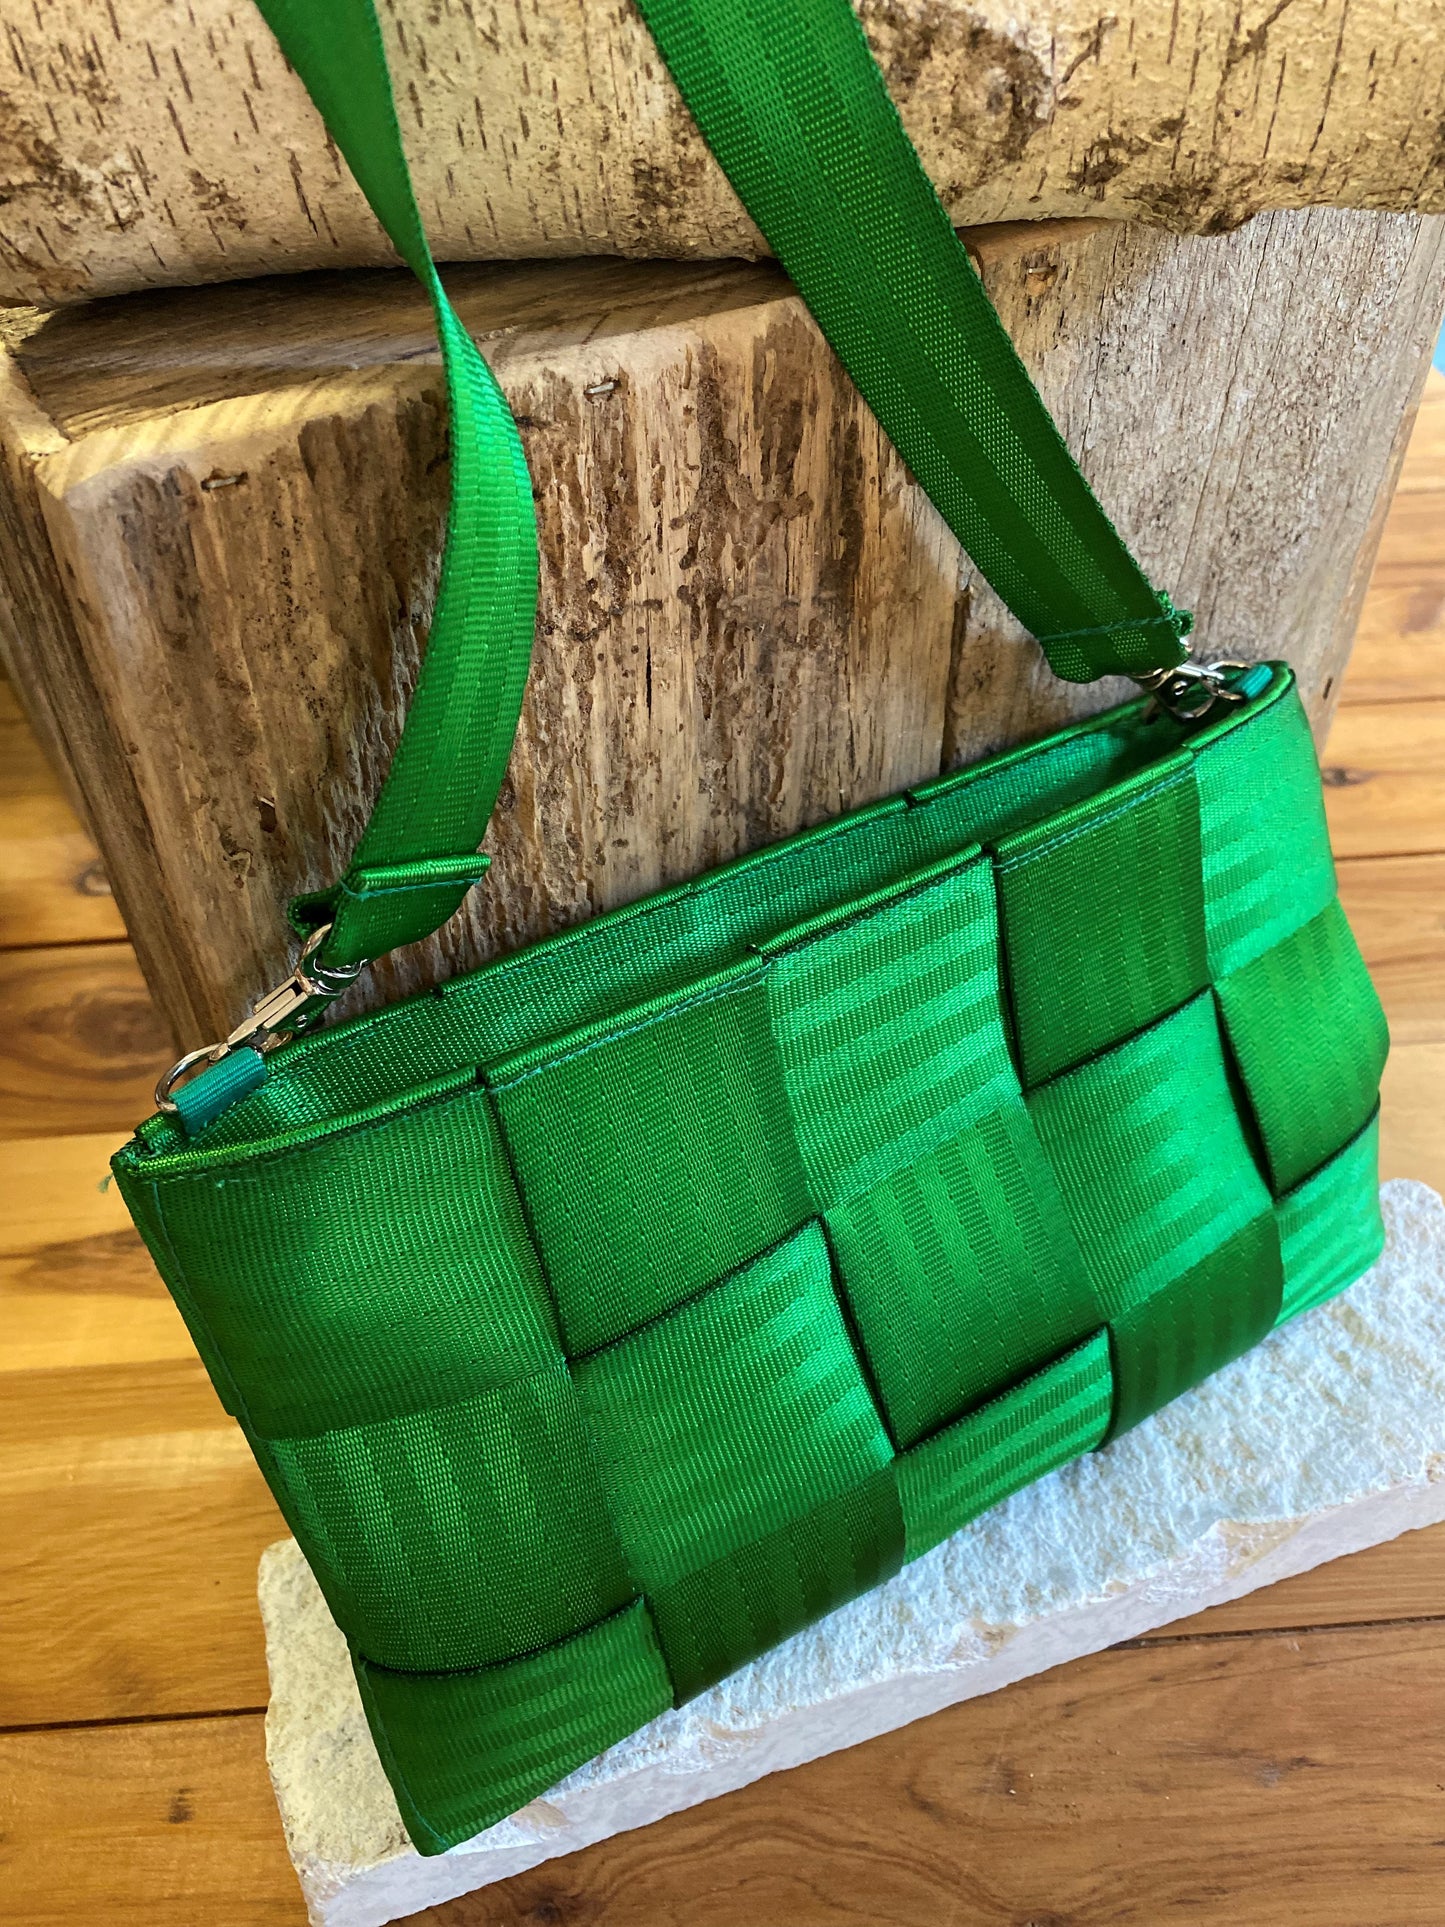 Upcycled car seat belt bag in emerald green. A rich green criss cross pattern with seatbelt texture, and a long over the shoulder style strap.